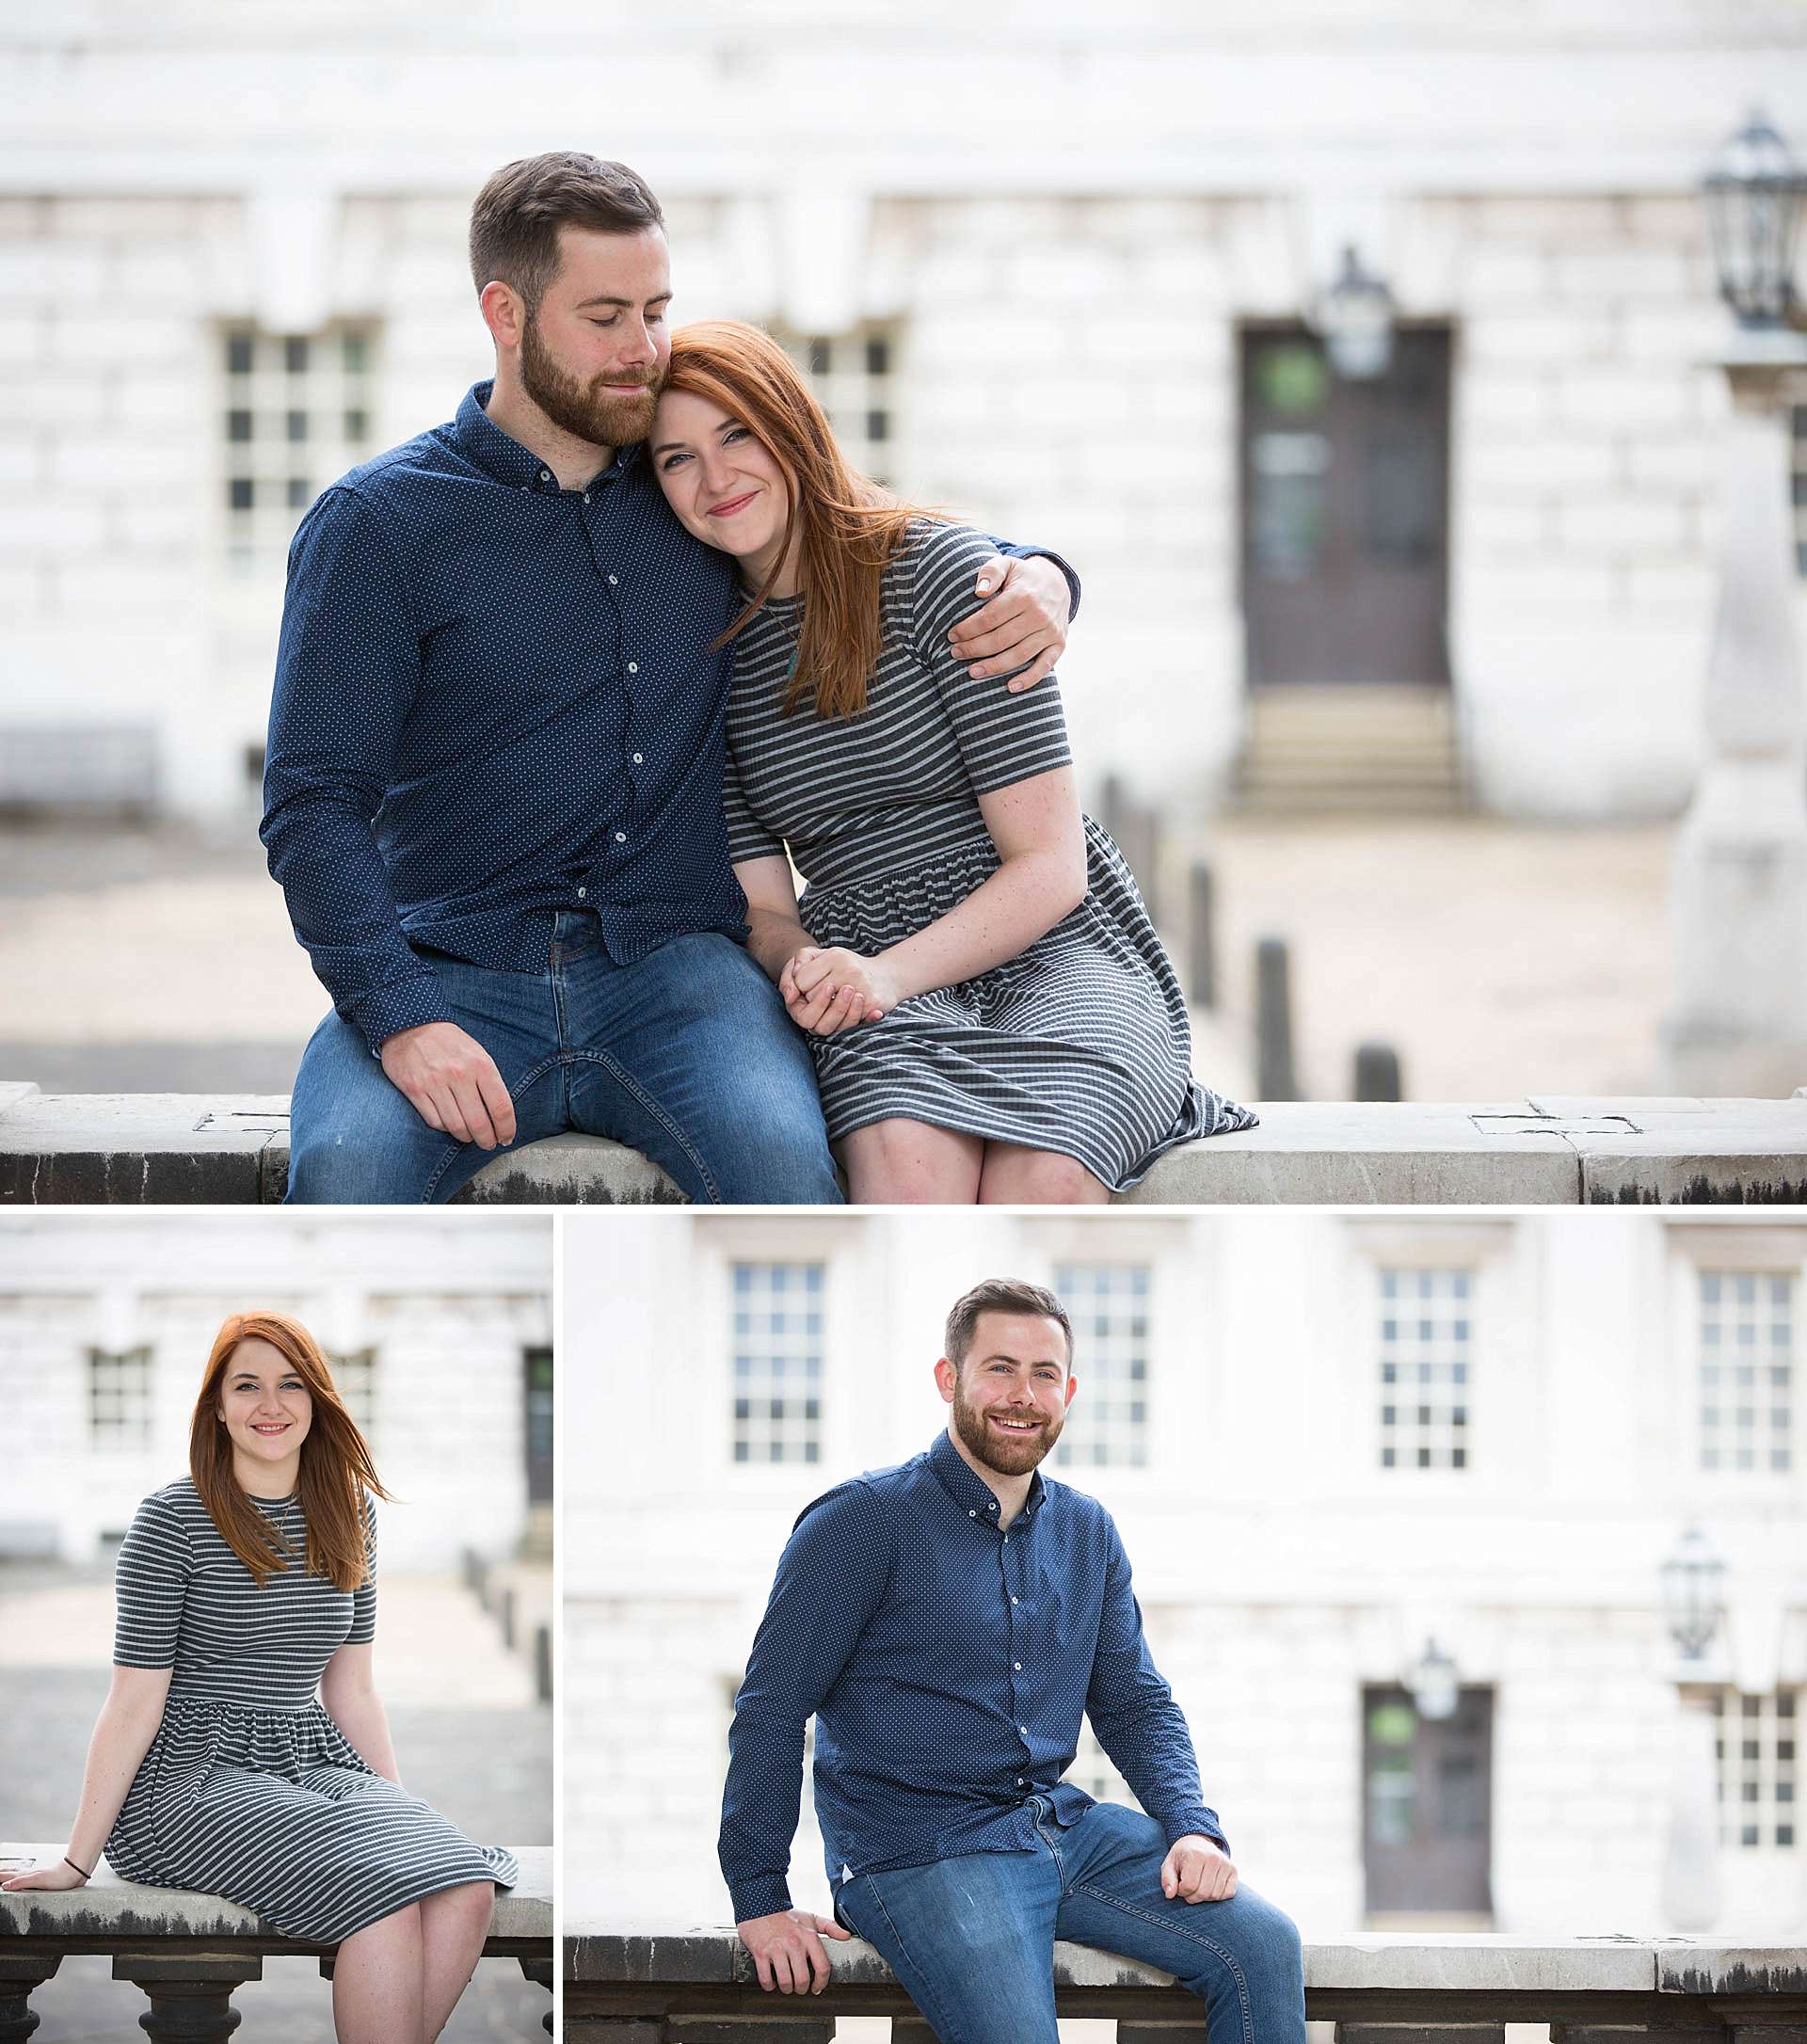 Paige and Michael's engagement shoot